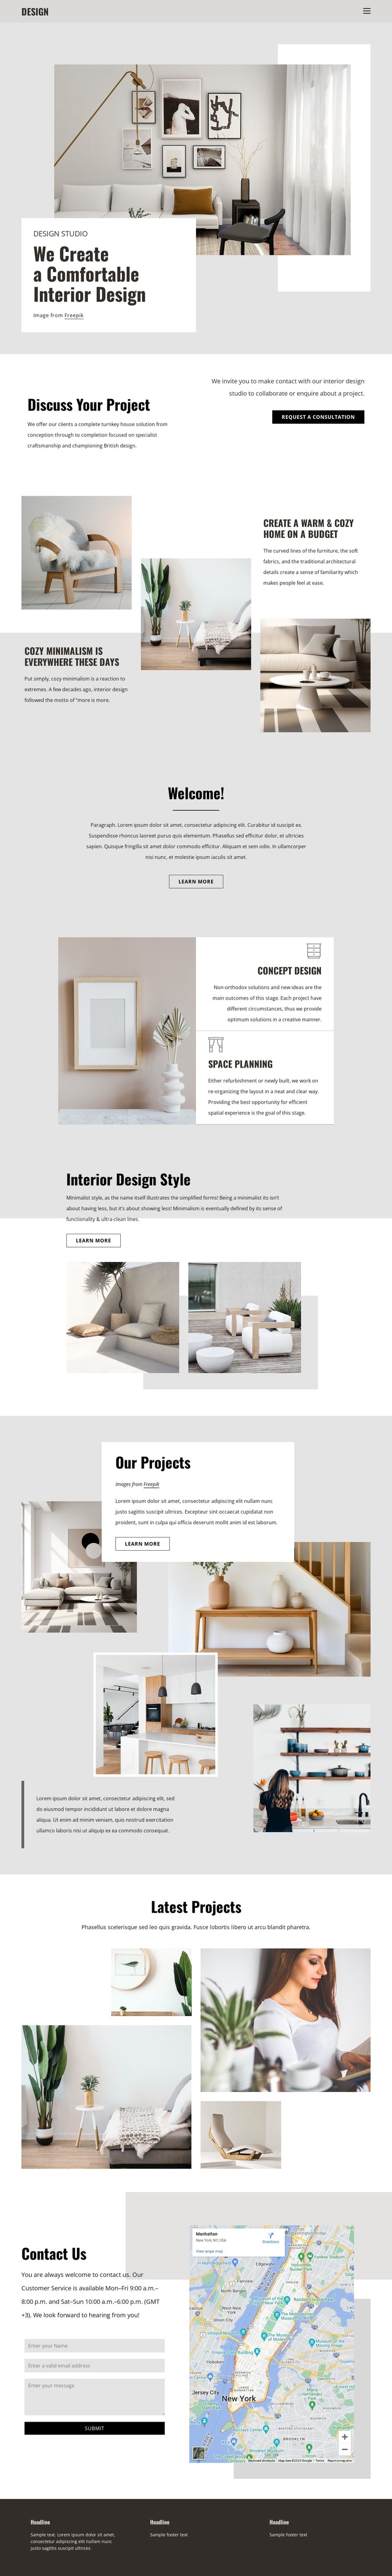 Designing Spaces and building dreams WordPress Theme